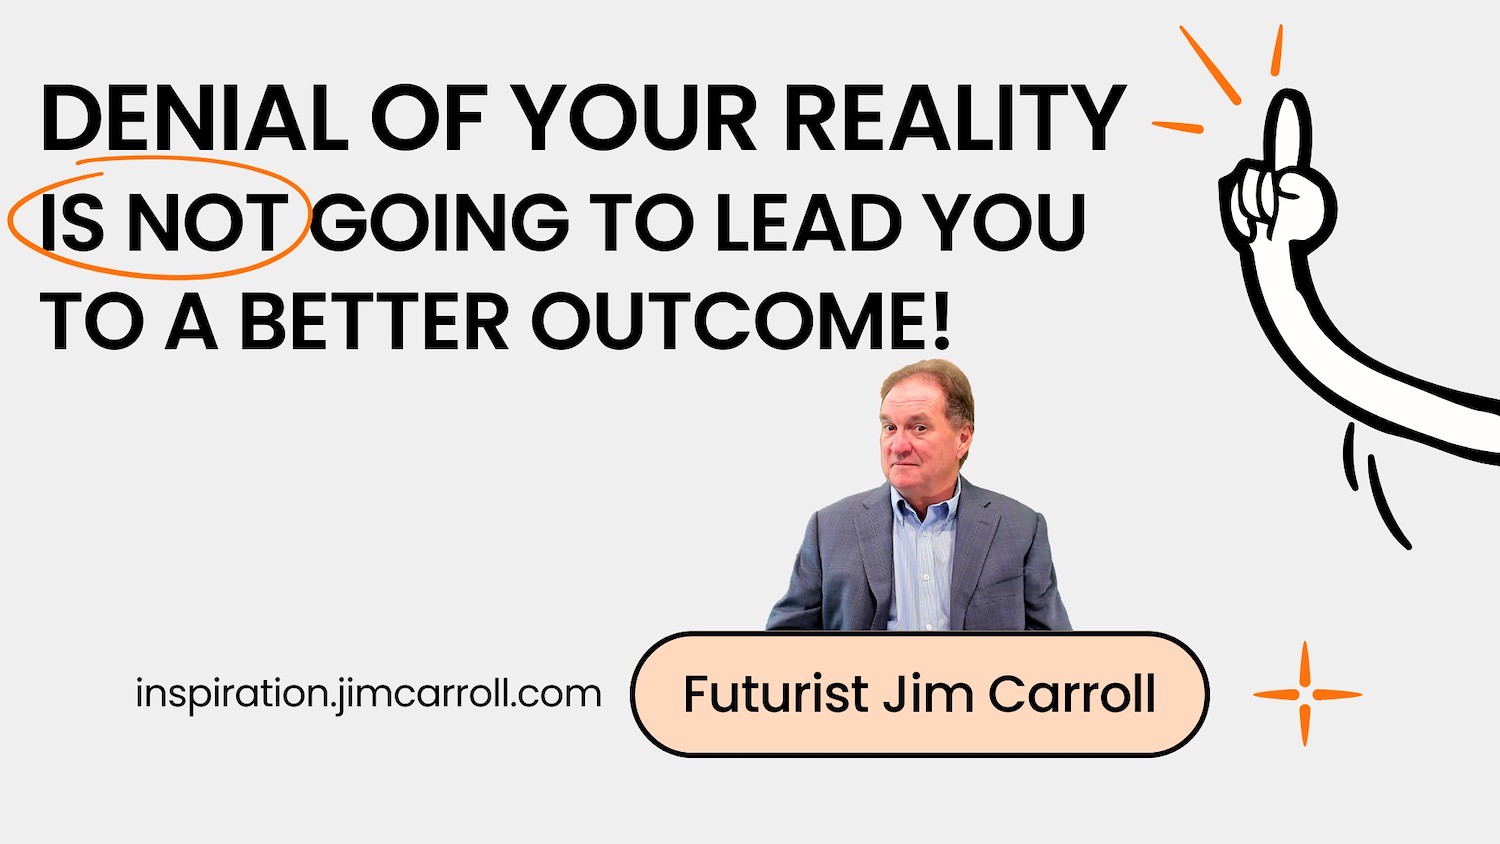 "Denial of your reality is not going to lead you to a better outcome!" - Futurist Jim Carroll